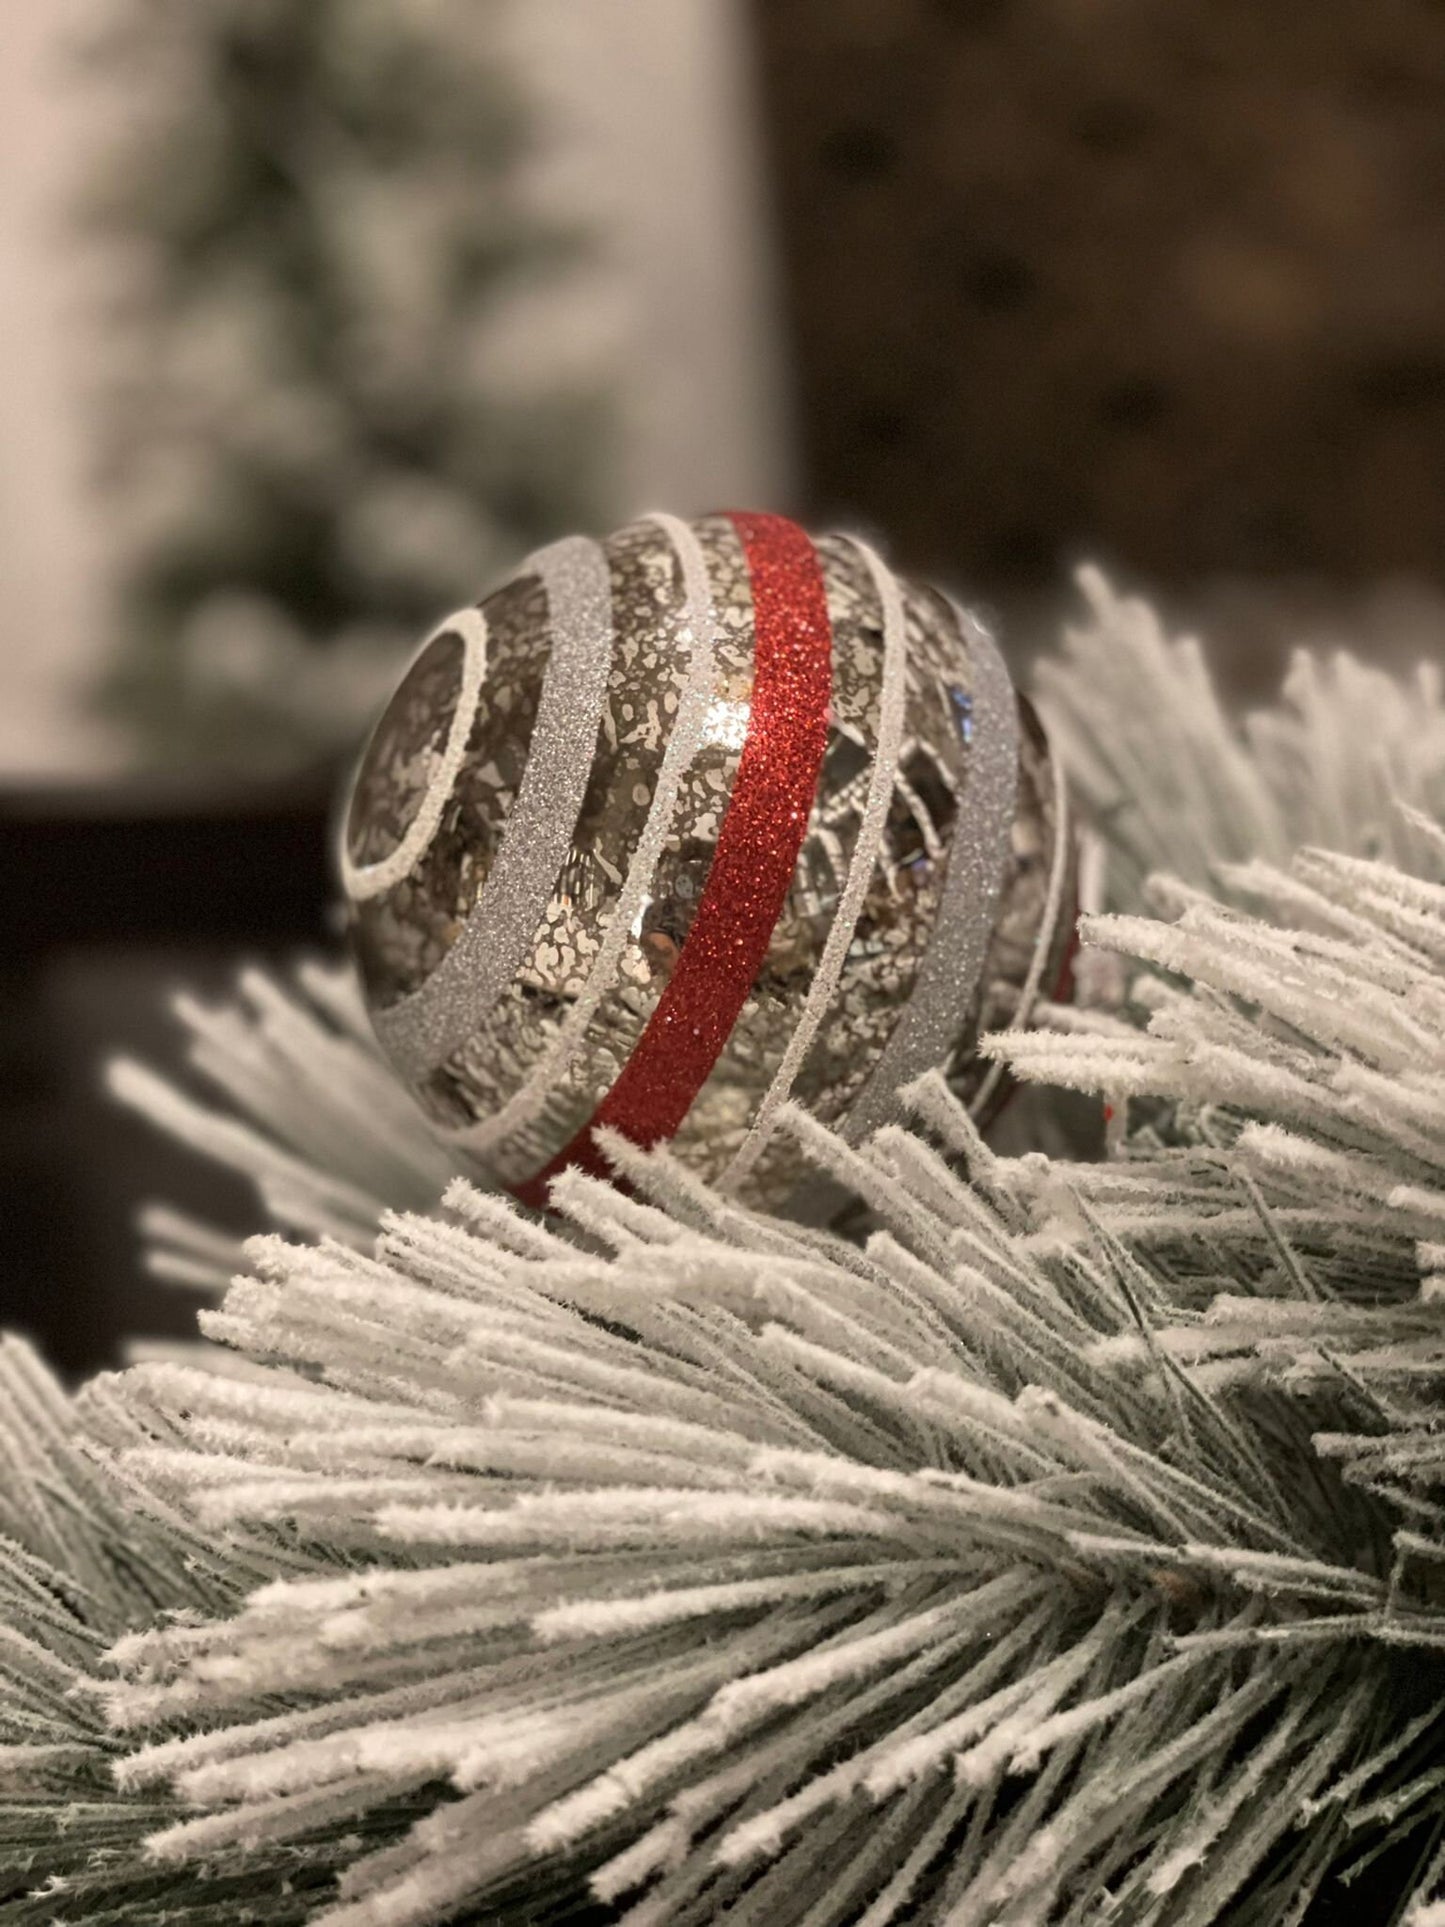 4" Striped glass ornament. Red and silver.